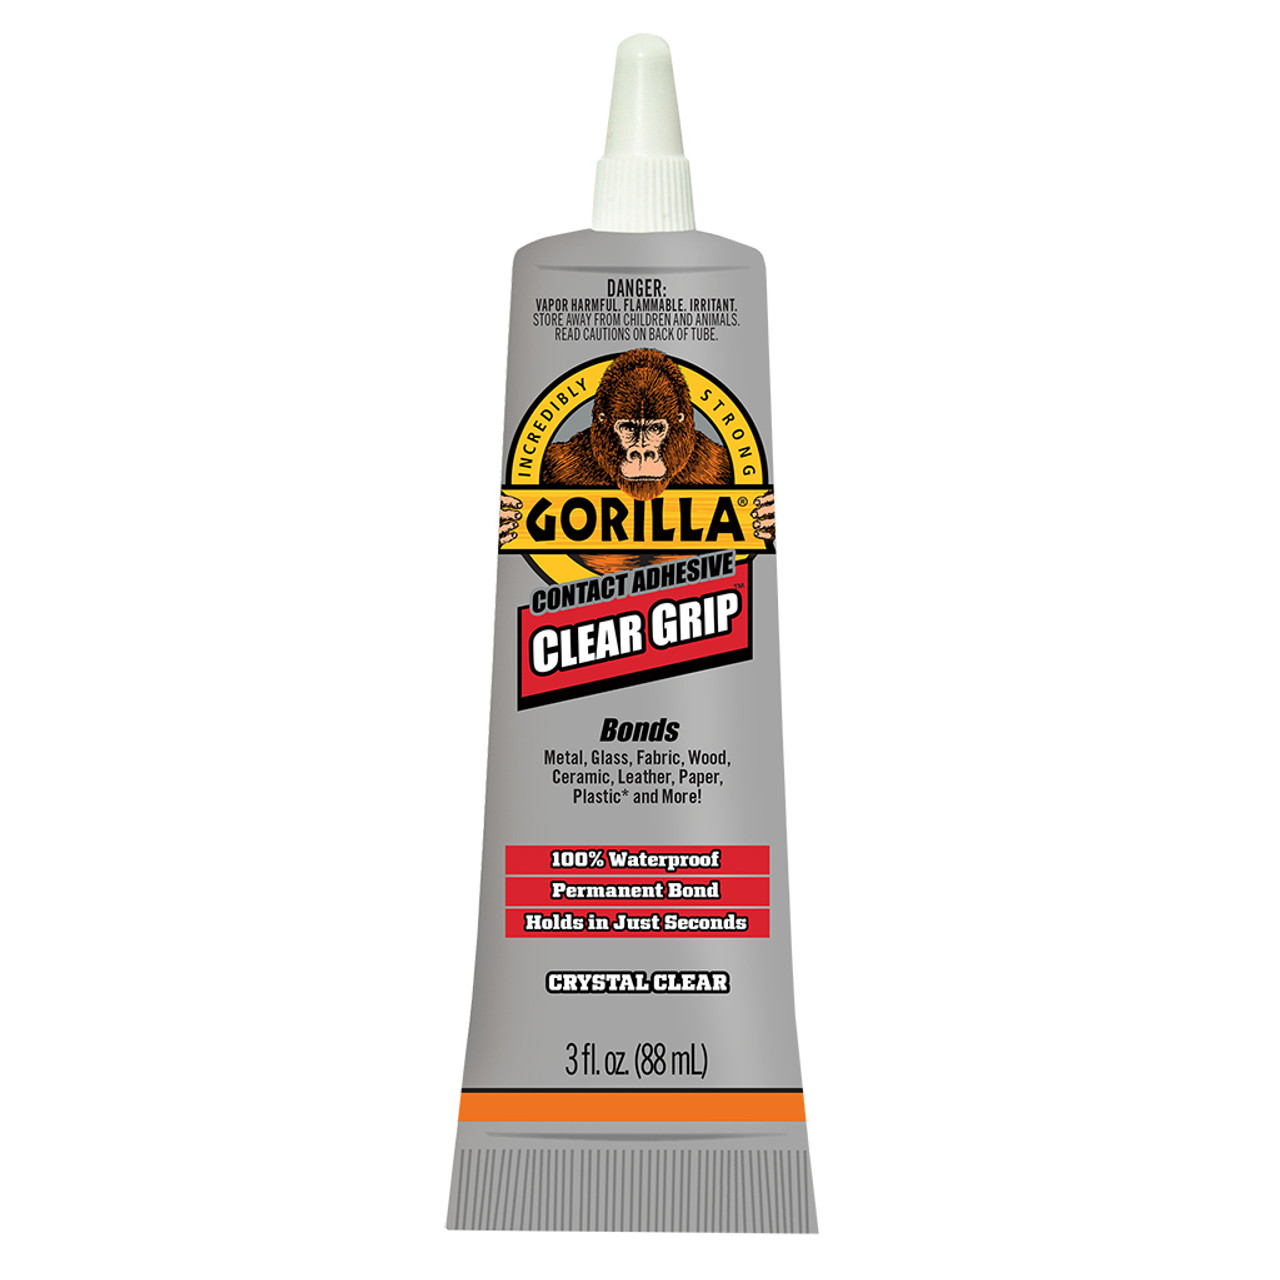 Gorilla Clear Grip Contact Adhesive, 3 oz. - Midwest Technology Products